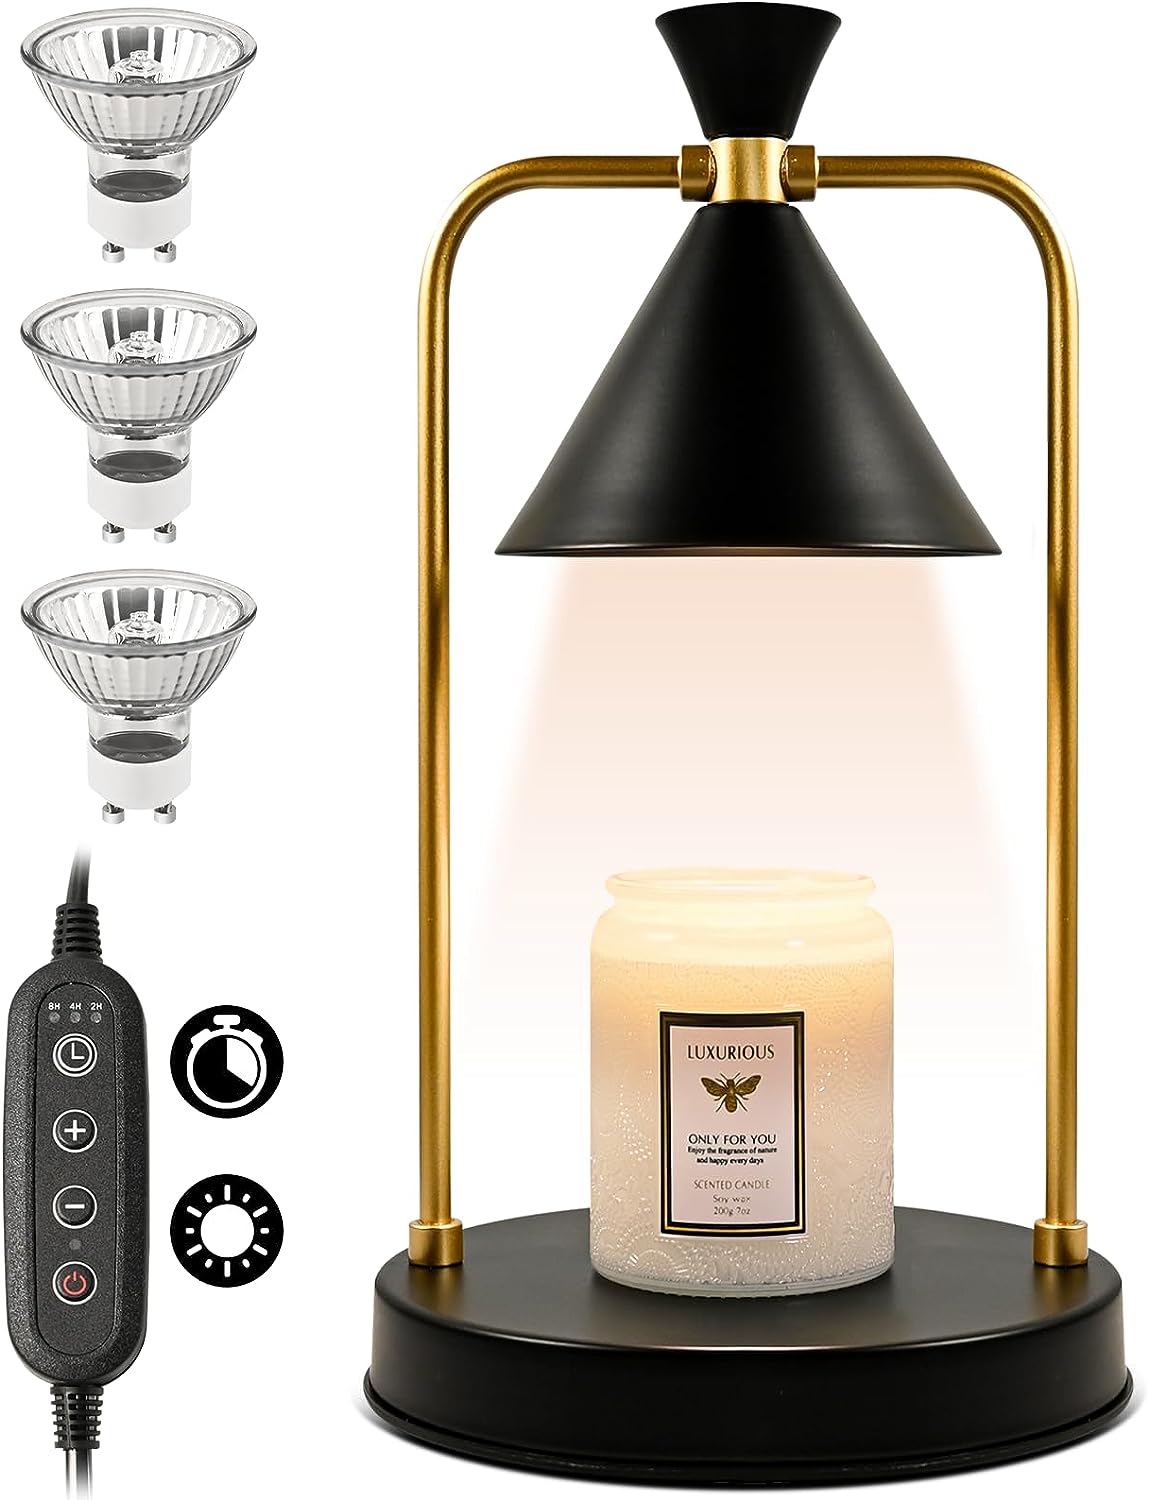 THE Candle Warmer Lamp with 3 Bulbs, Electric Wax Melter Warmer with Timer, Dimmable Candle Warmer Light with White Jar for Small & Large Jar Candles, Aromatic Candle Holders Heater for Home Decor (Black)